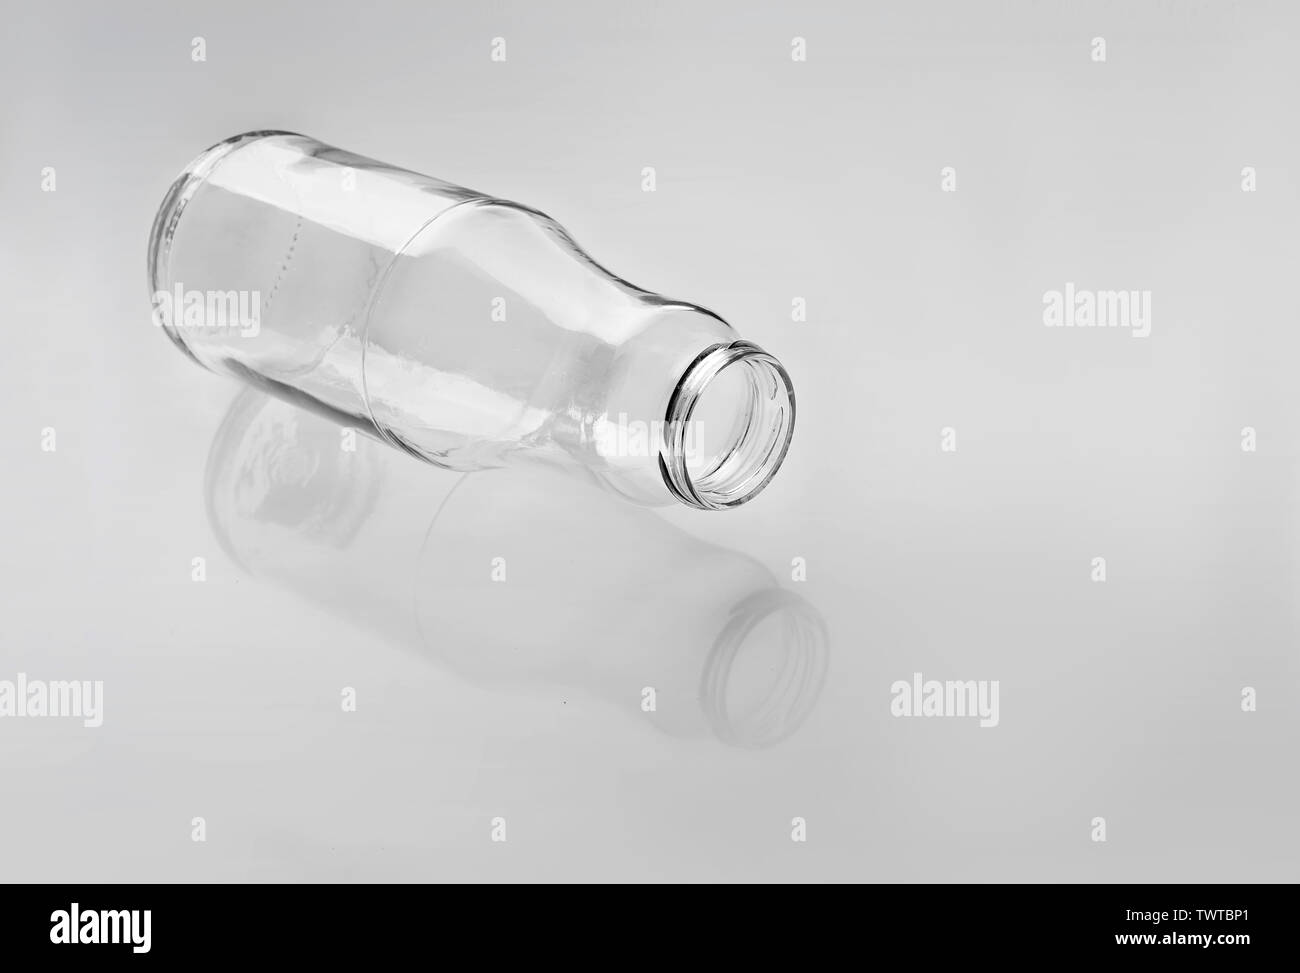 Empty glass bottle for drinks milk, juice, water on a white background. Stock Photo